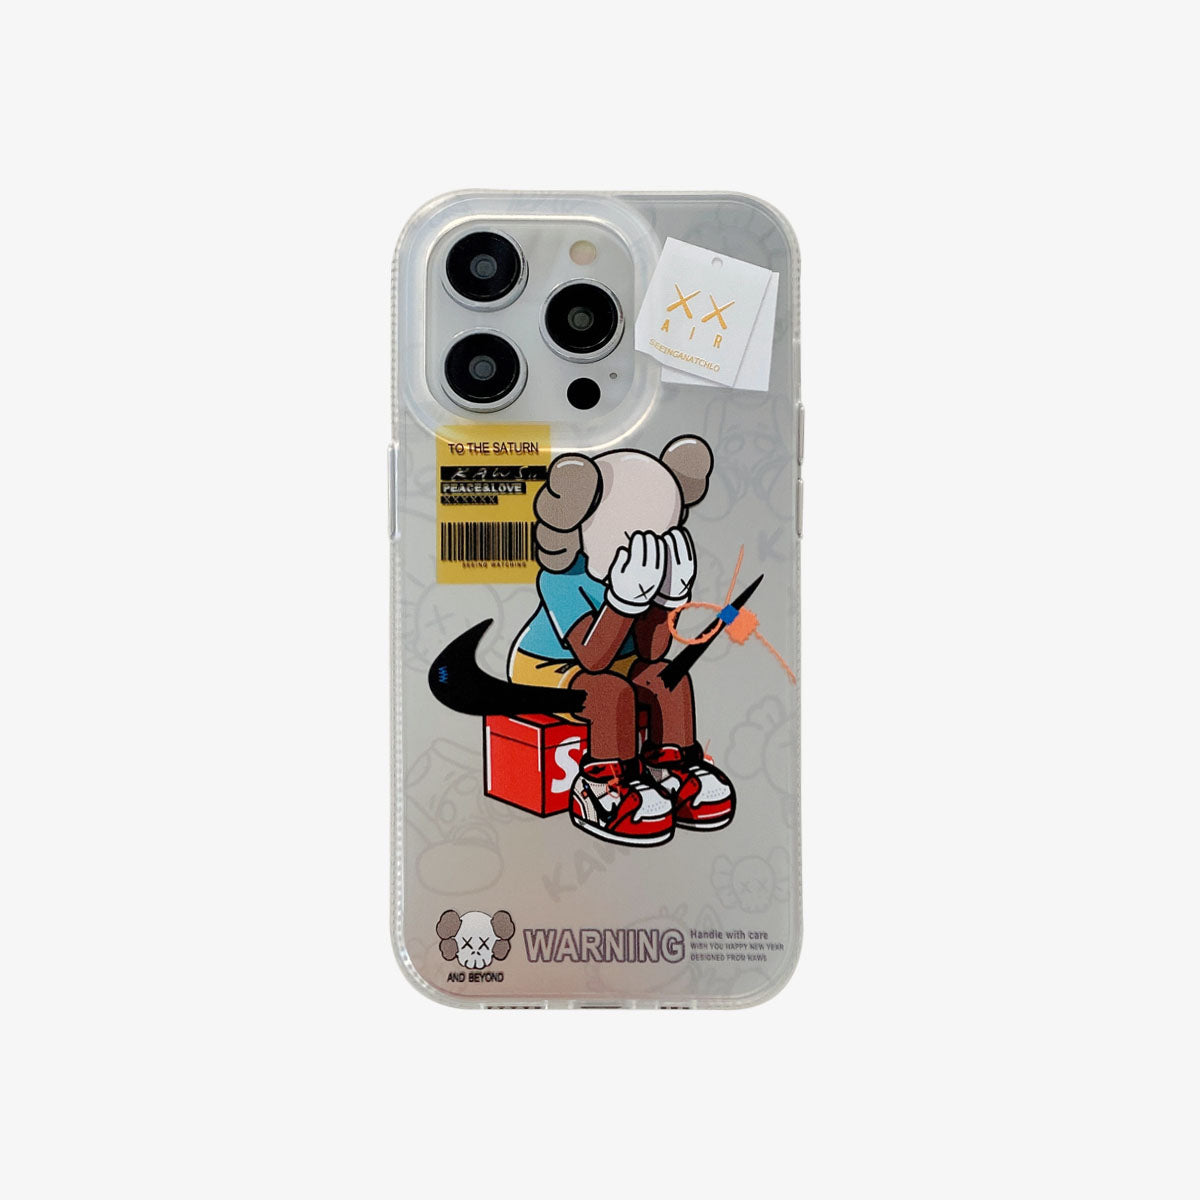 Cell Phones & Accessories, Limited Kaws Iphone 12 Case 3dsilicone